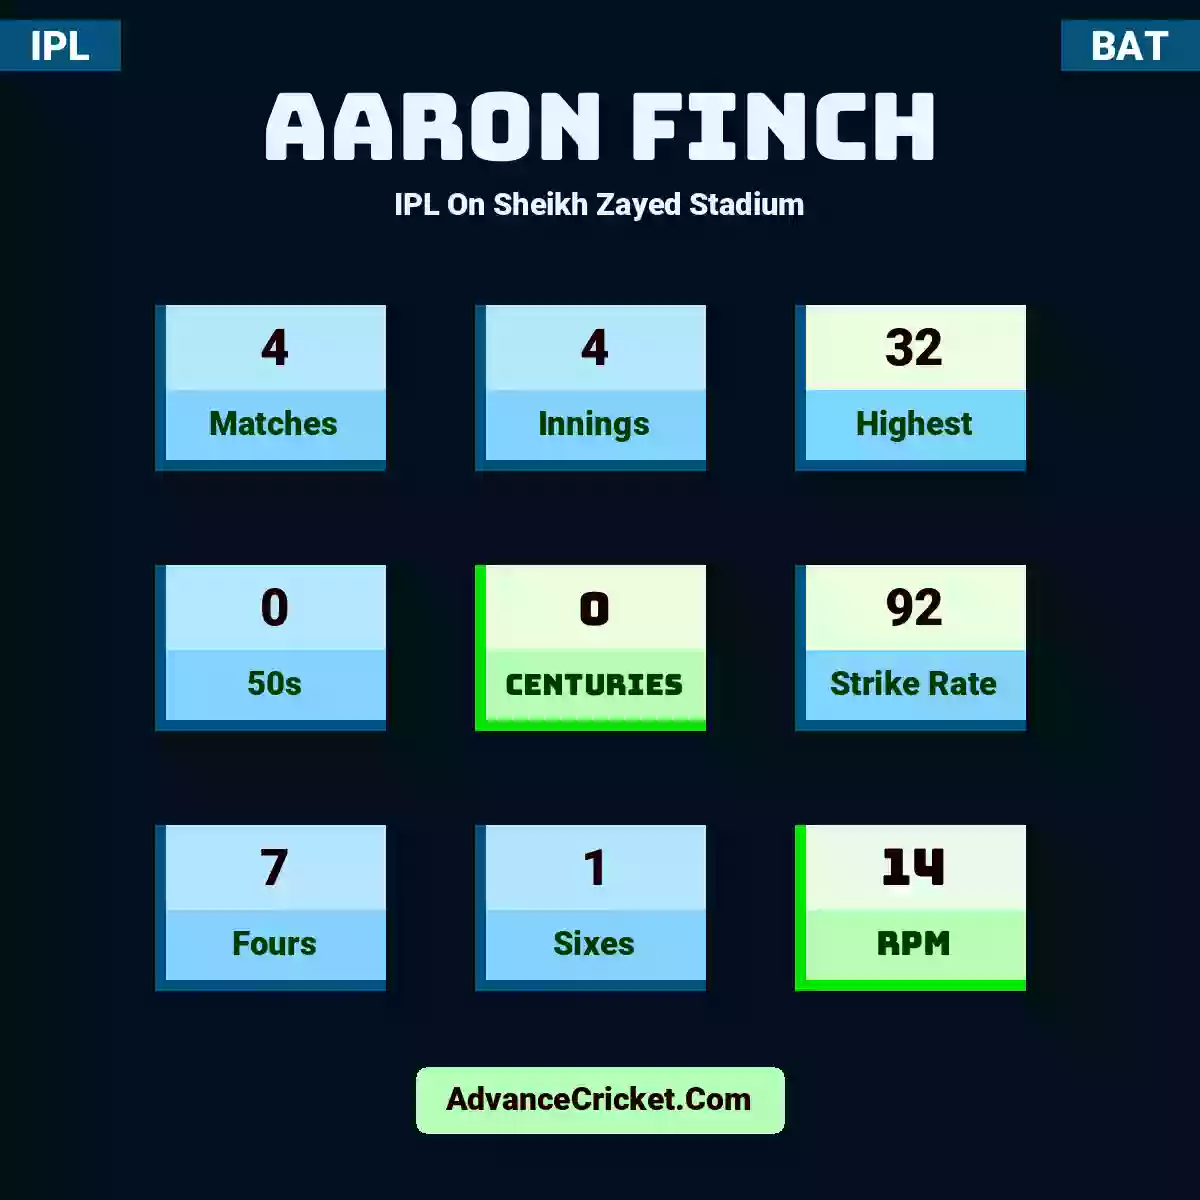 Aaron Finch IPL  On Sheikh Zayed Stadium, Aaron Finch played 4 matches, scored 32 runs as highest, 0 half-centuries, and 0 centuries, with a strike rate of 92. A.Finch hit 7 fours and 1 sixes, with an RPM of 14.